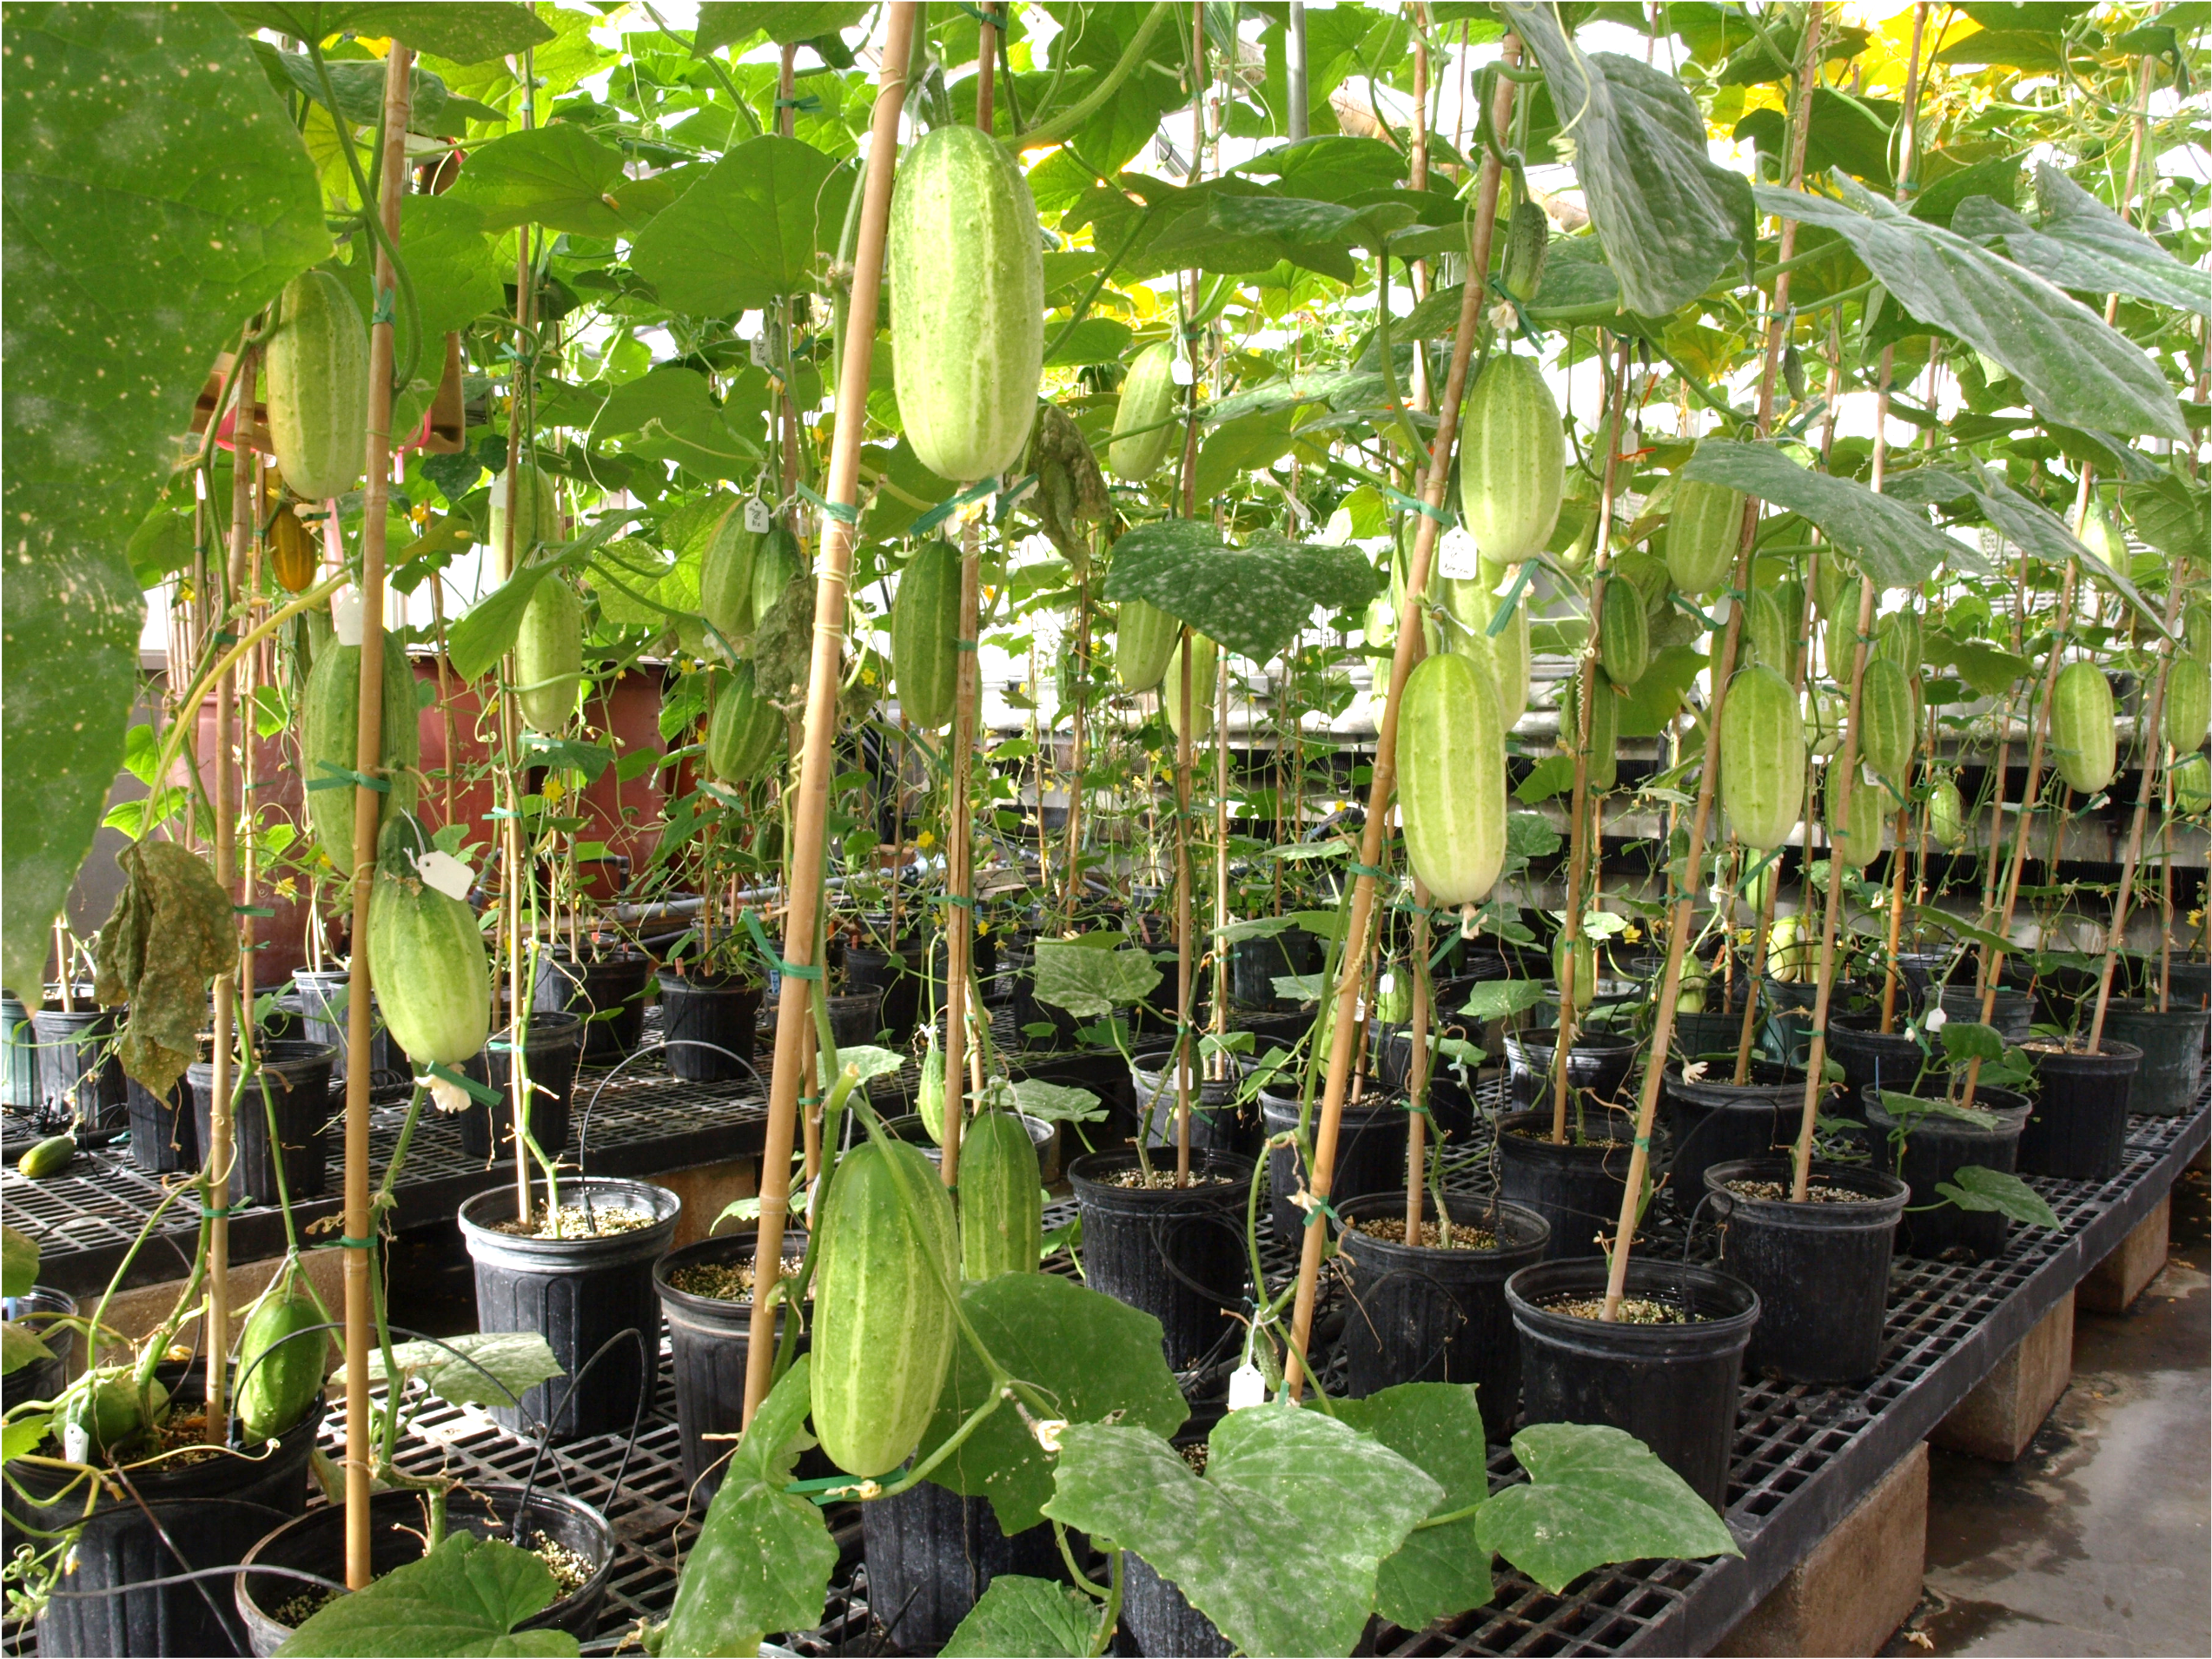 Cucumbers growing on vines in a greenhouse